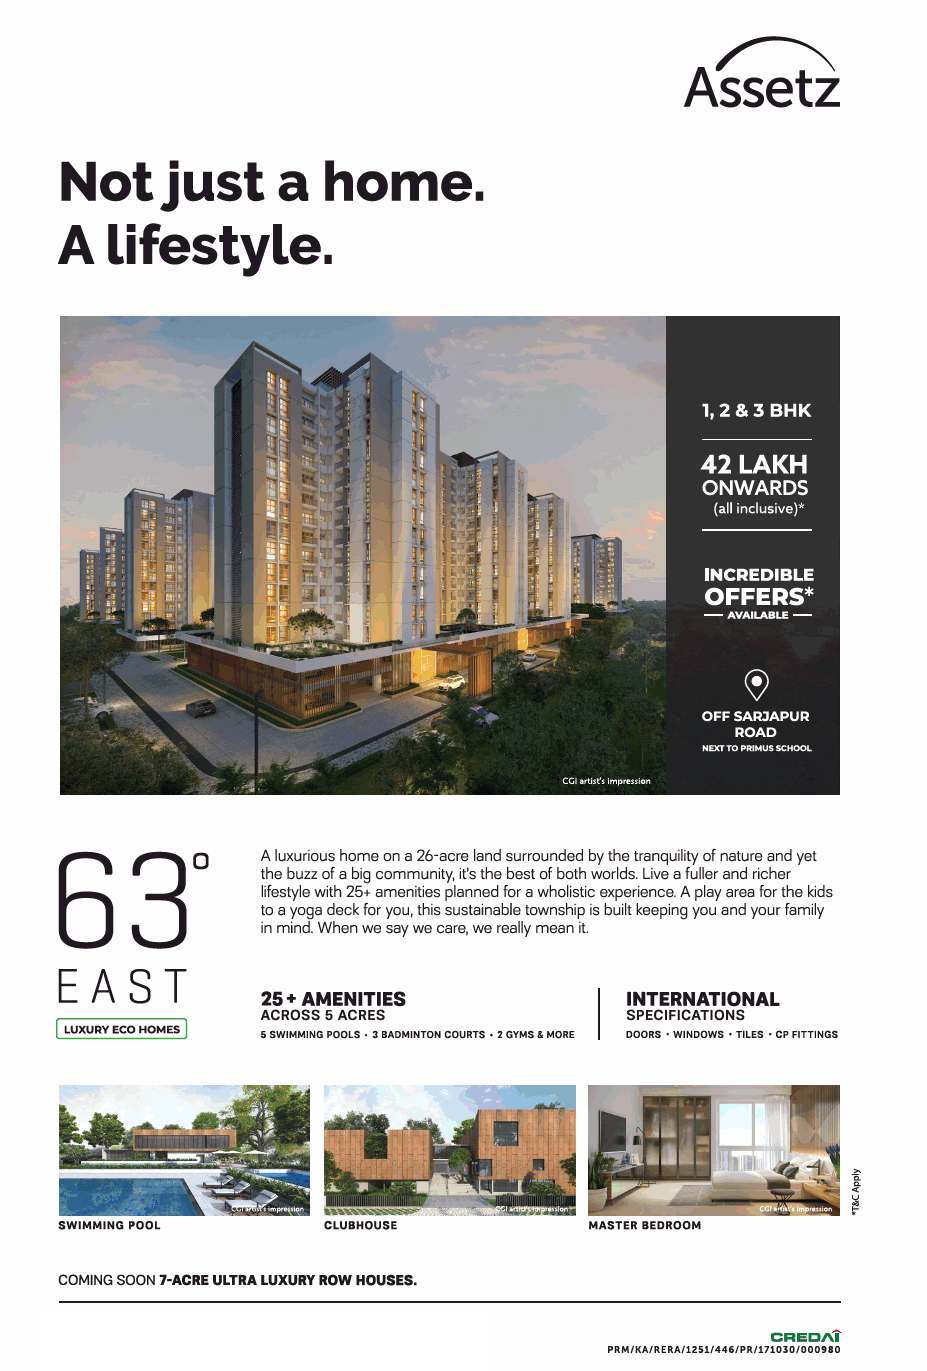 Live a fuller & richer lifestyle with 25+ amenities at Assetz 63° East in Bangalore